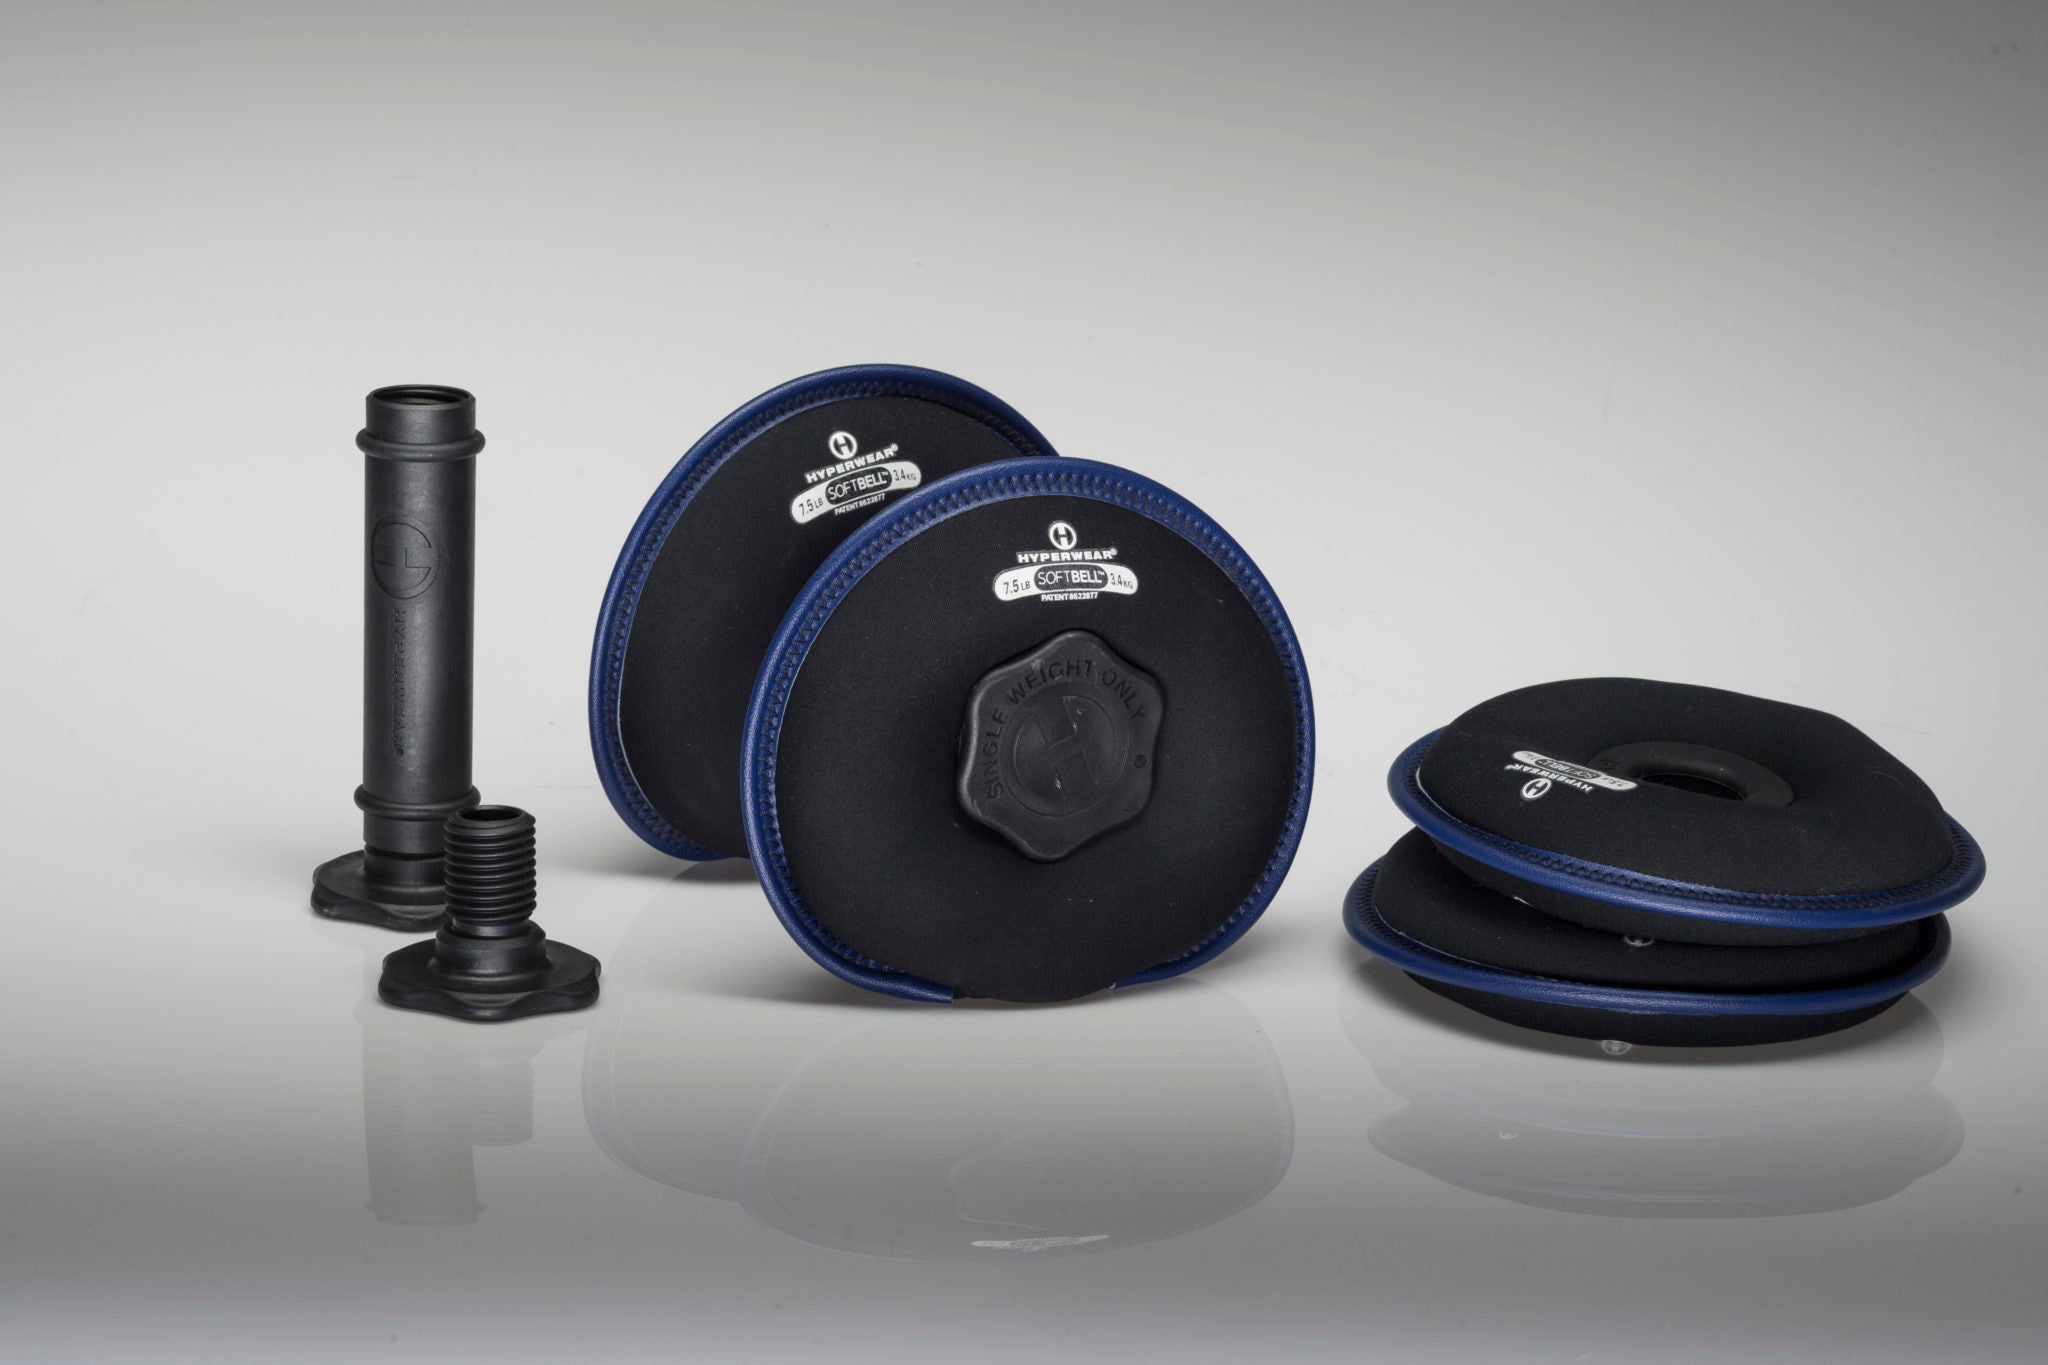 Product picture showing assembled and disassembled soft adjustable dumbbell